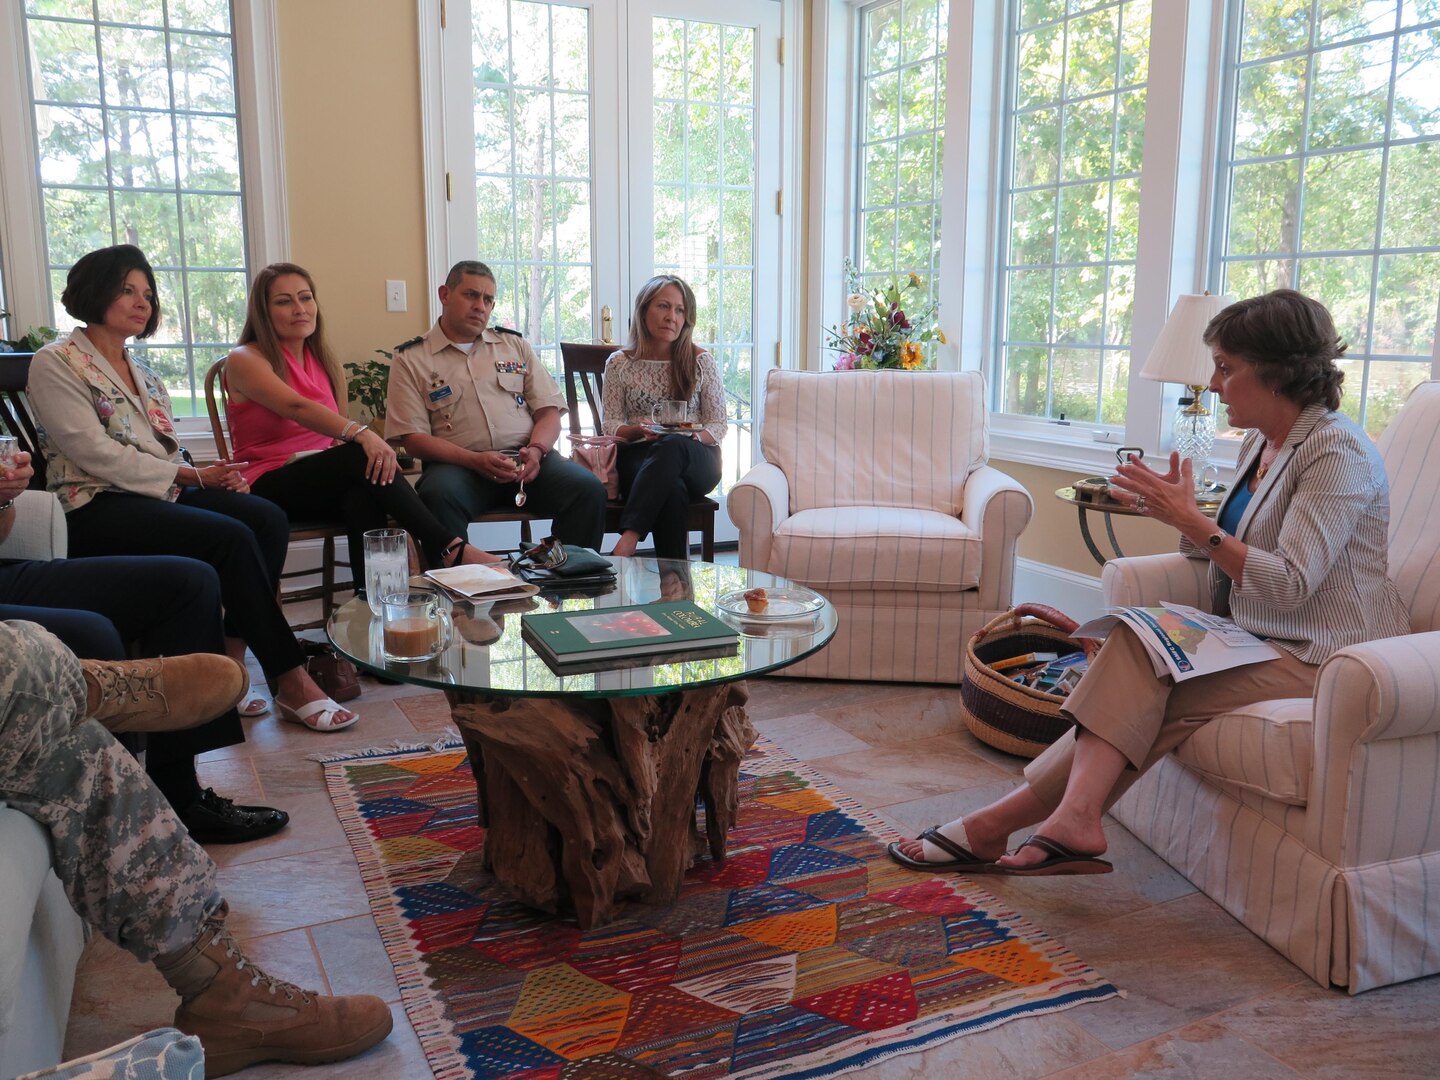 Barbara Livingston, wife of U.S. Army Maj. Gen. Robert E. Livingston, Jr., adjutant general for South Carolina, right, talks to Claudia Patricia Novoa, spouse of Colombian Air Force Maj. Gen. Ramses Rueda, chief of education for the Colombian Air Force and Durley Rocio Torrado Ortiz, spouse of Colombian Lt. Col.  Alcaro Enrique Gomez Franco at an informal gathering held at the Livingston's home, Sept. 8, 2015, near Columbia, S.C. The gathering between the S.C. National Guard spouses and state partnership program spouses from Colombia focused on their roles as spouses of military leaders and the various programs in the National Guard such as the U.S. "Yellow Ribbon Reintegration Program" that puts in place programs to help families before, during, and after a deployment.